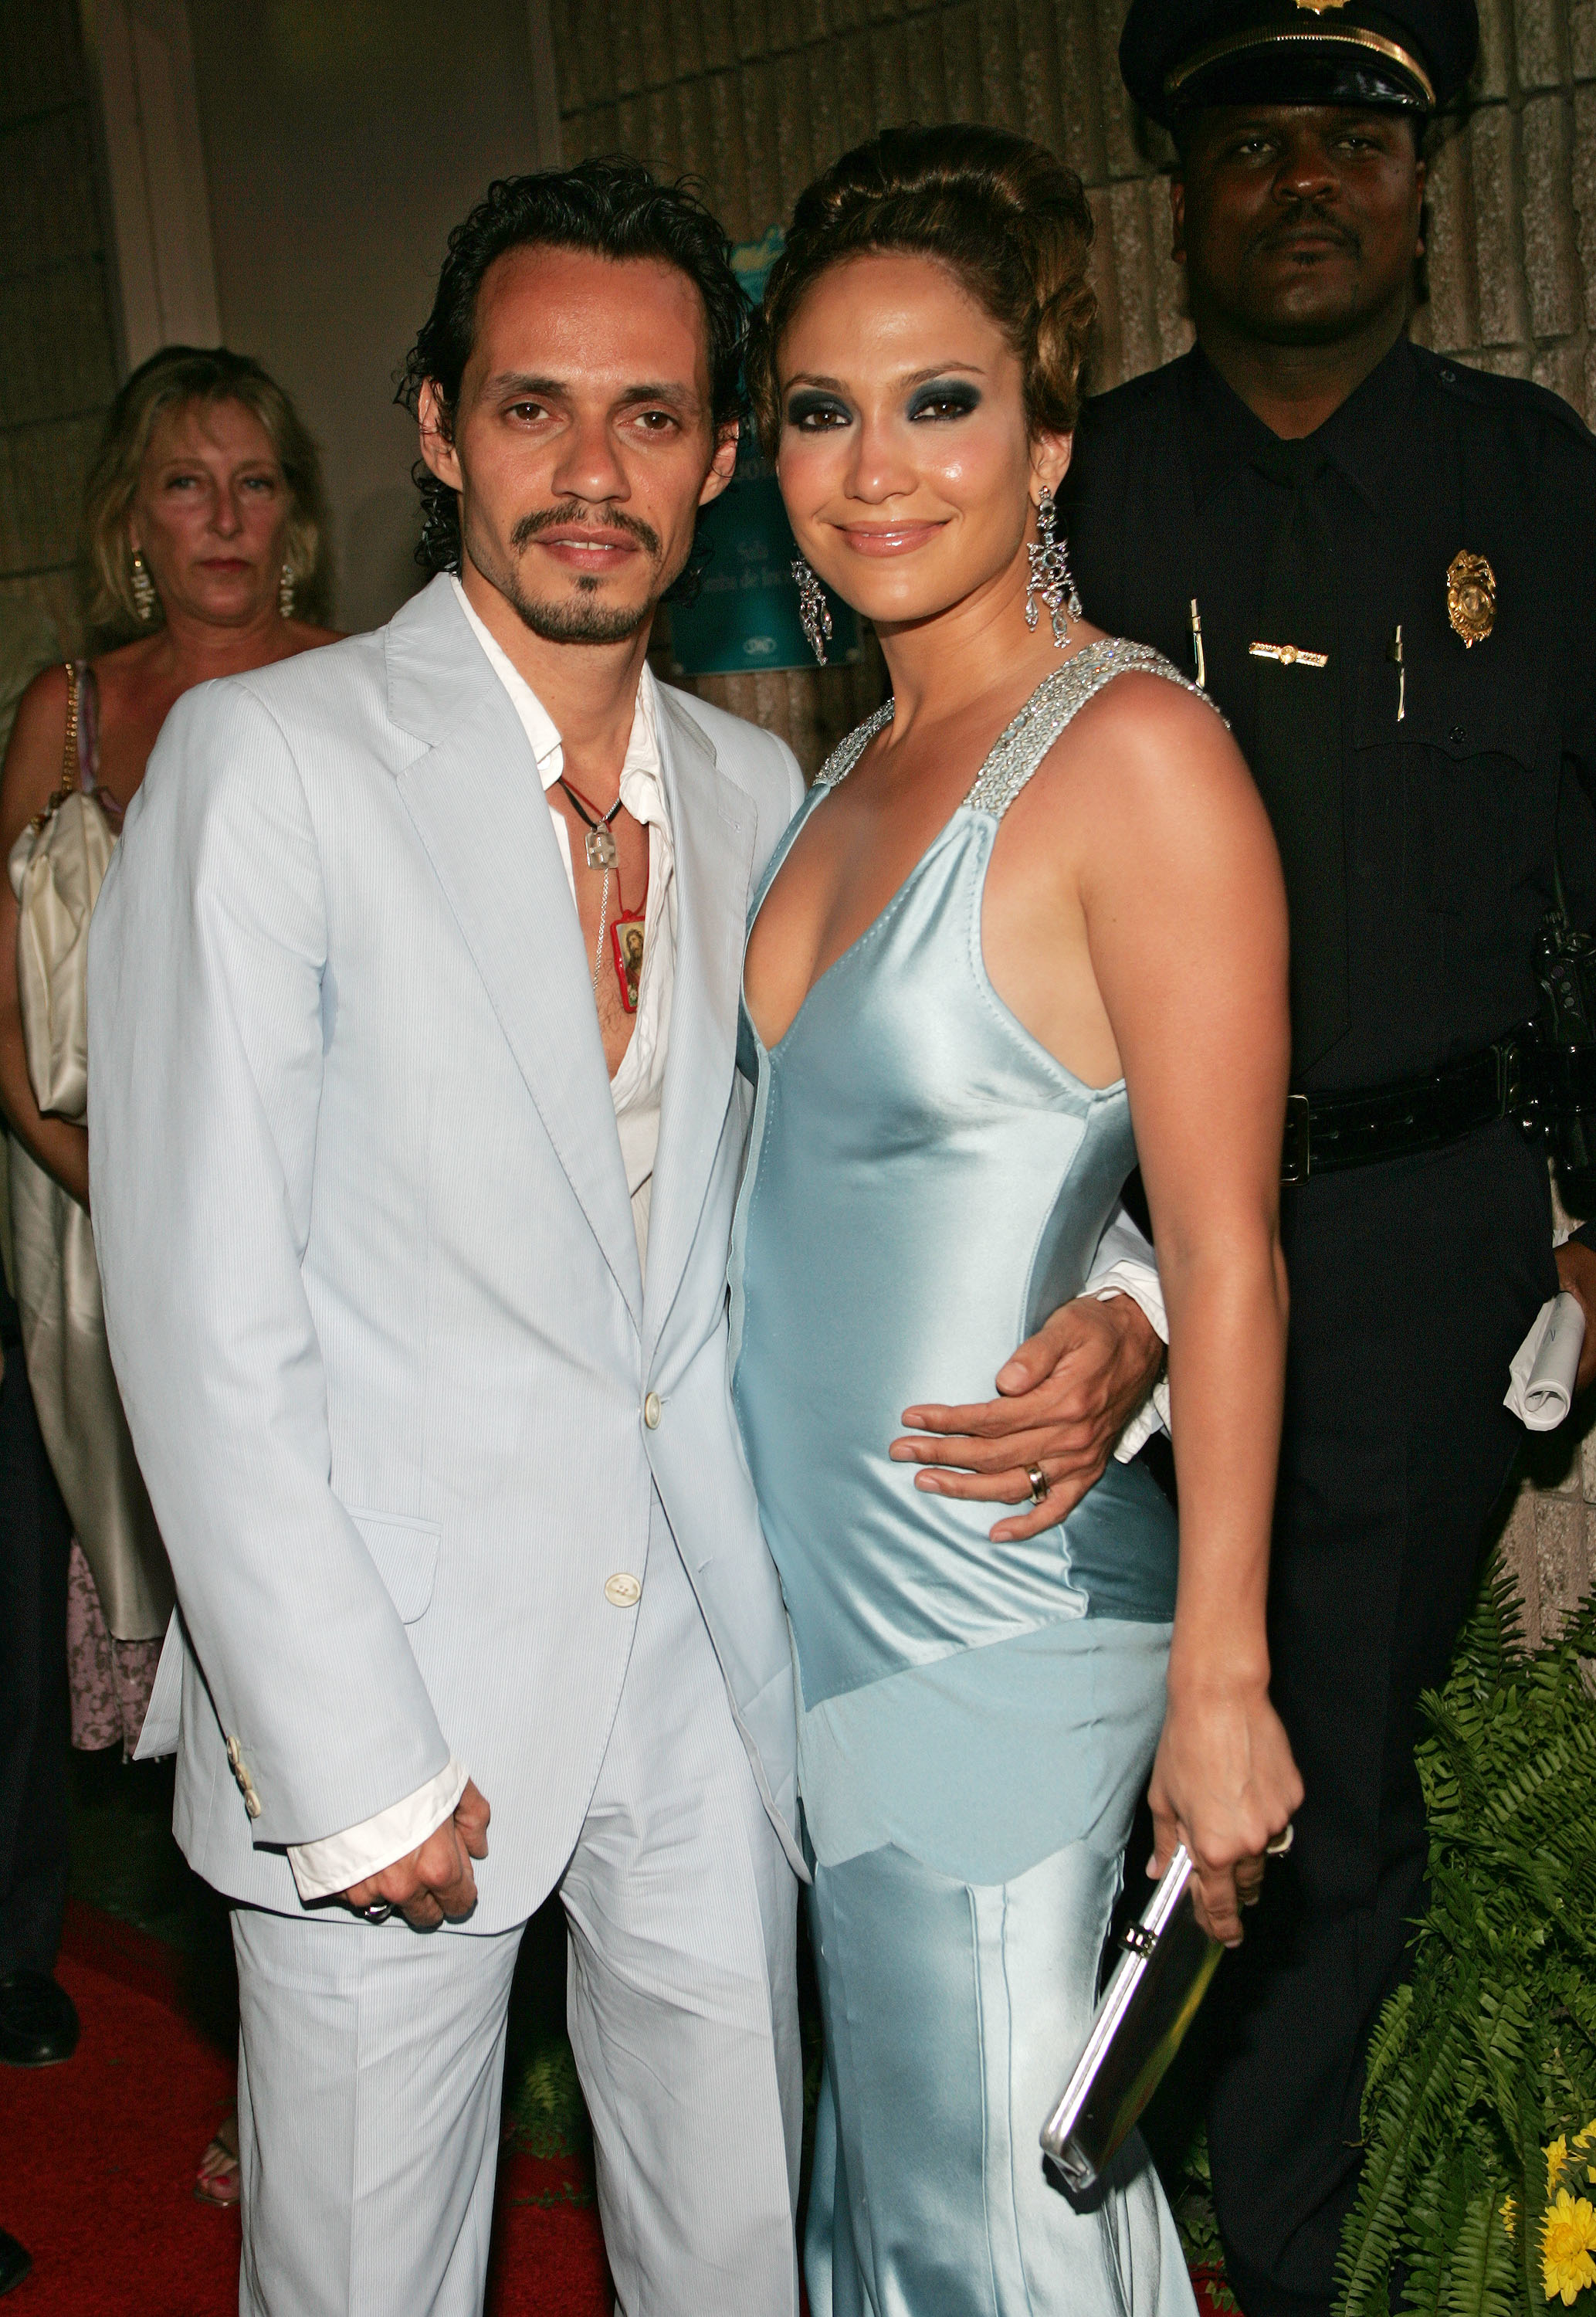 JLo on the red carpet in a sleeveless, satiny gown with Mark Anthony